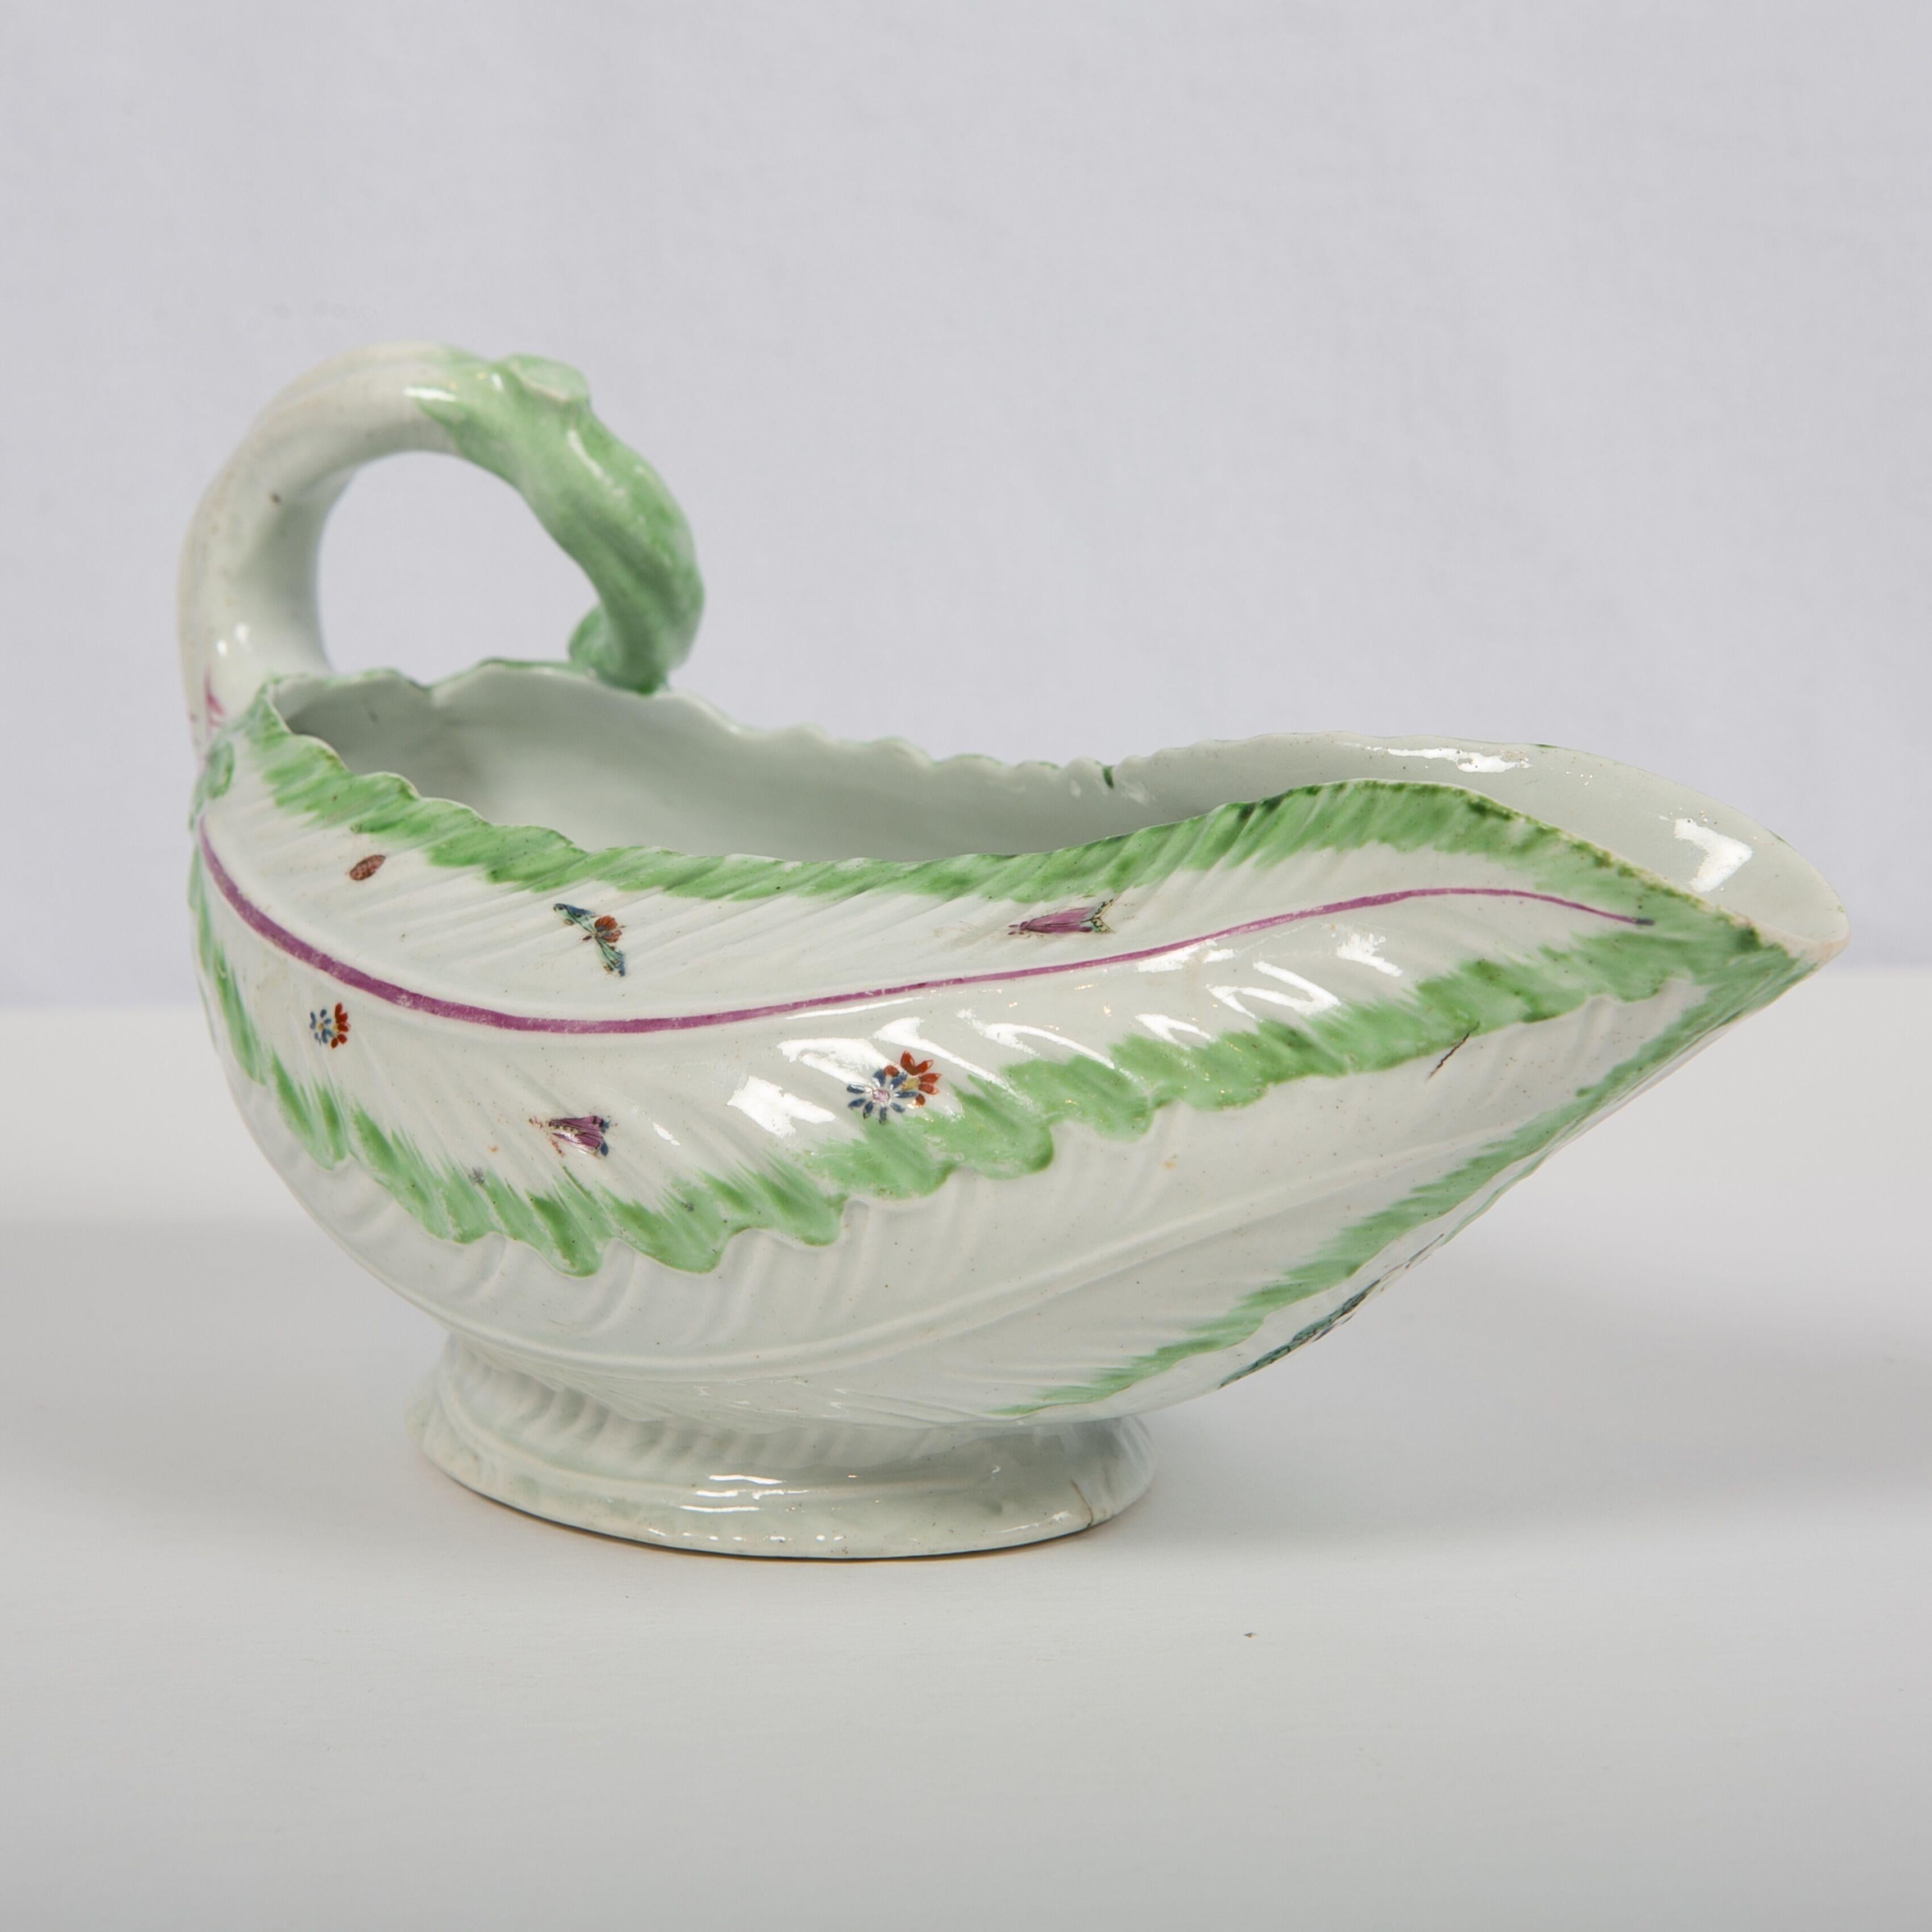 Hand-Painted Worcester Porcelain Sauceboat, Made in England, 18th Century